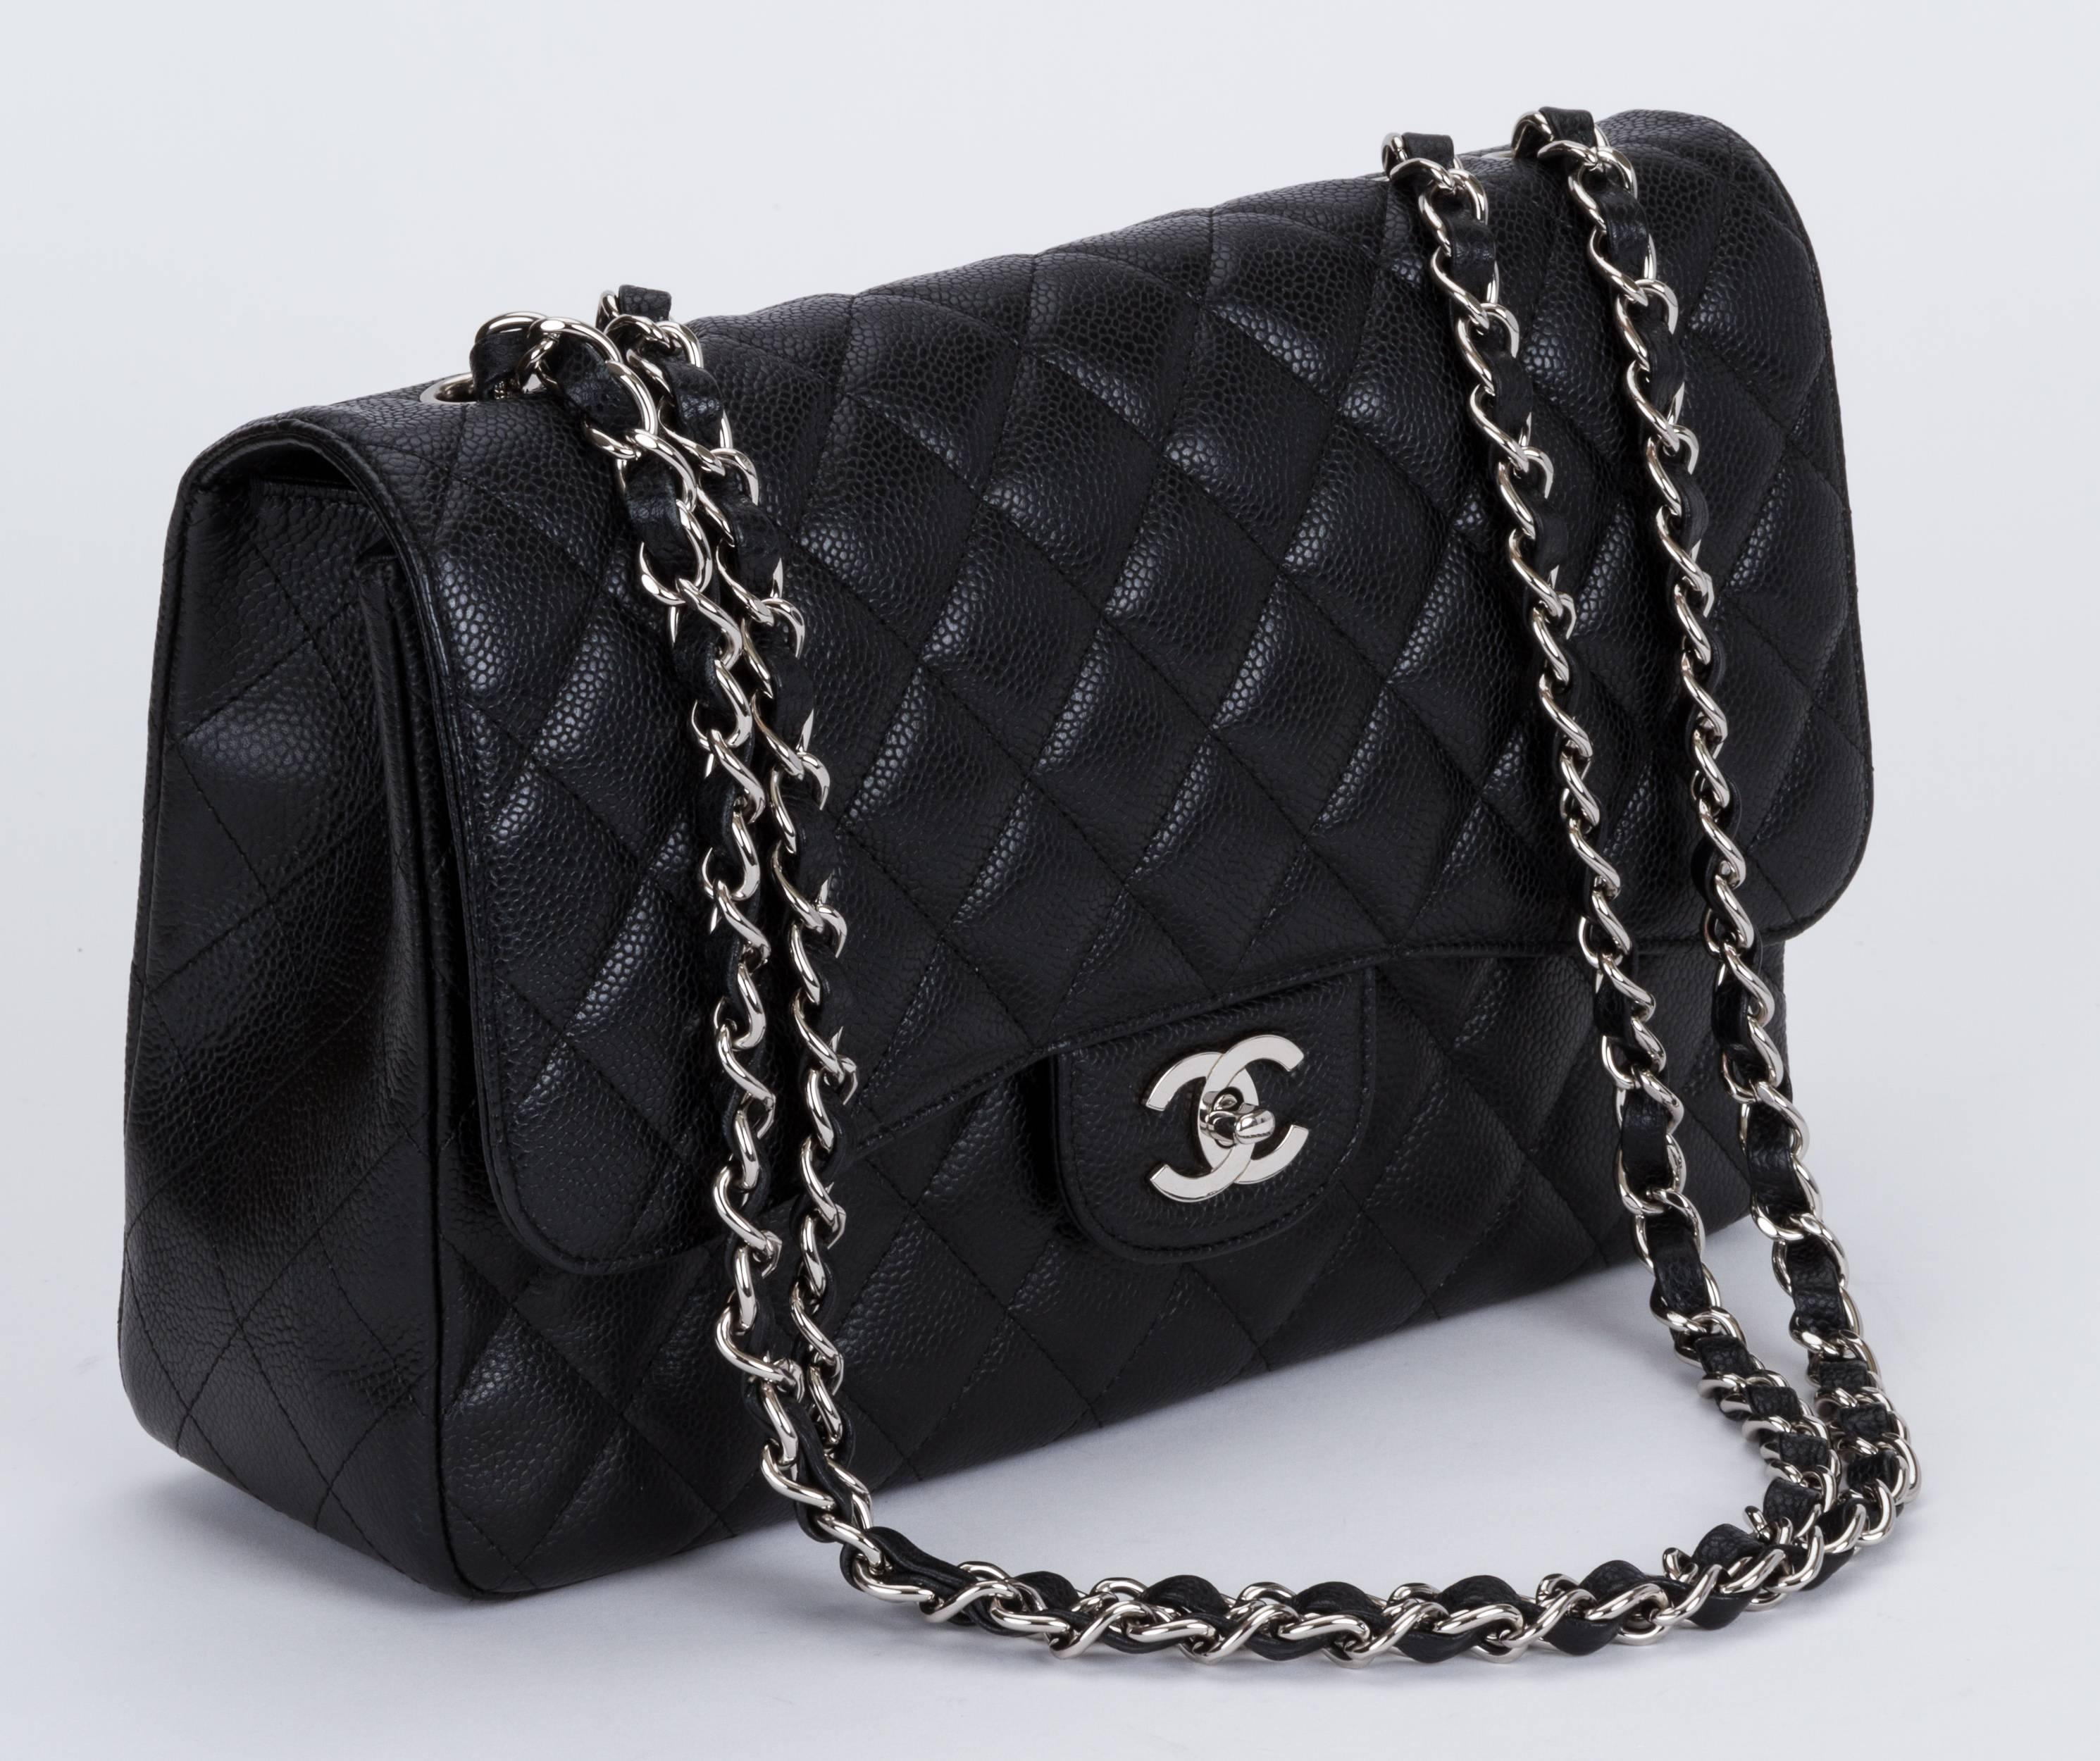 Chanel black caviar quilted single flap jumbo classic bag. Excellent condition. Shoulder drop 14